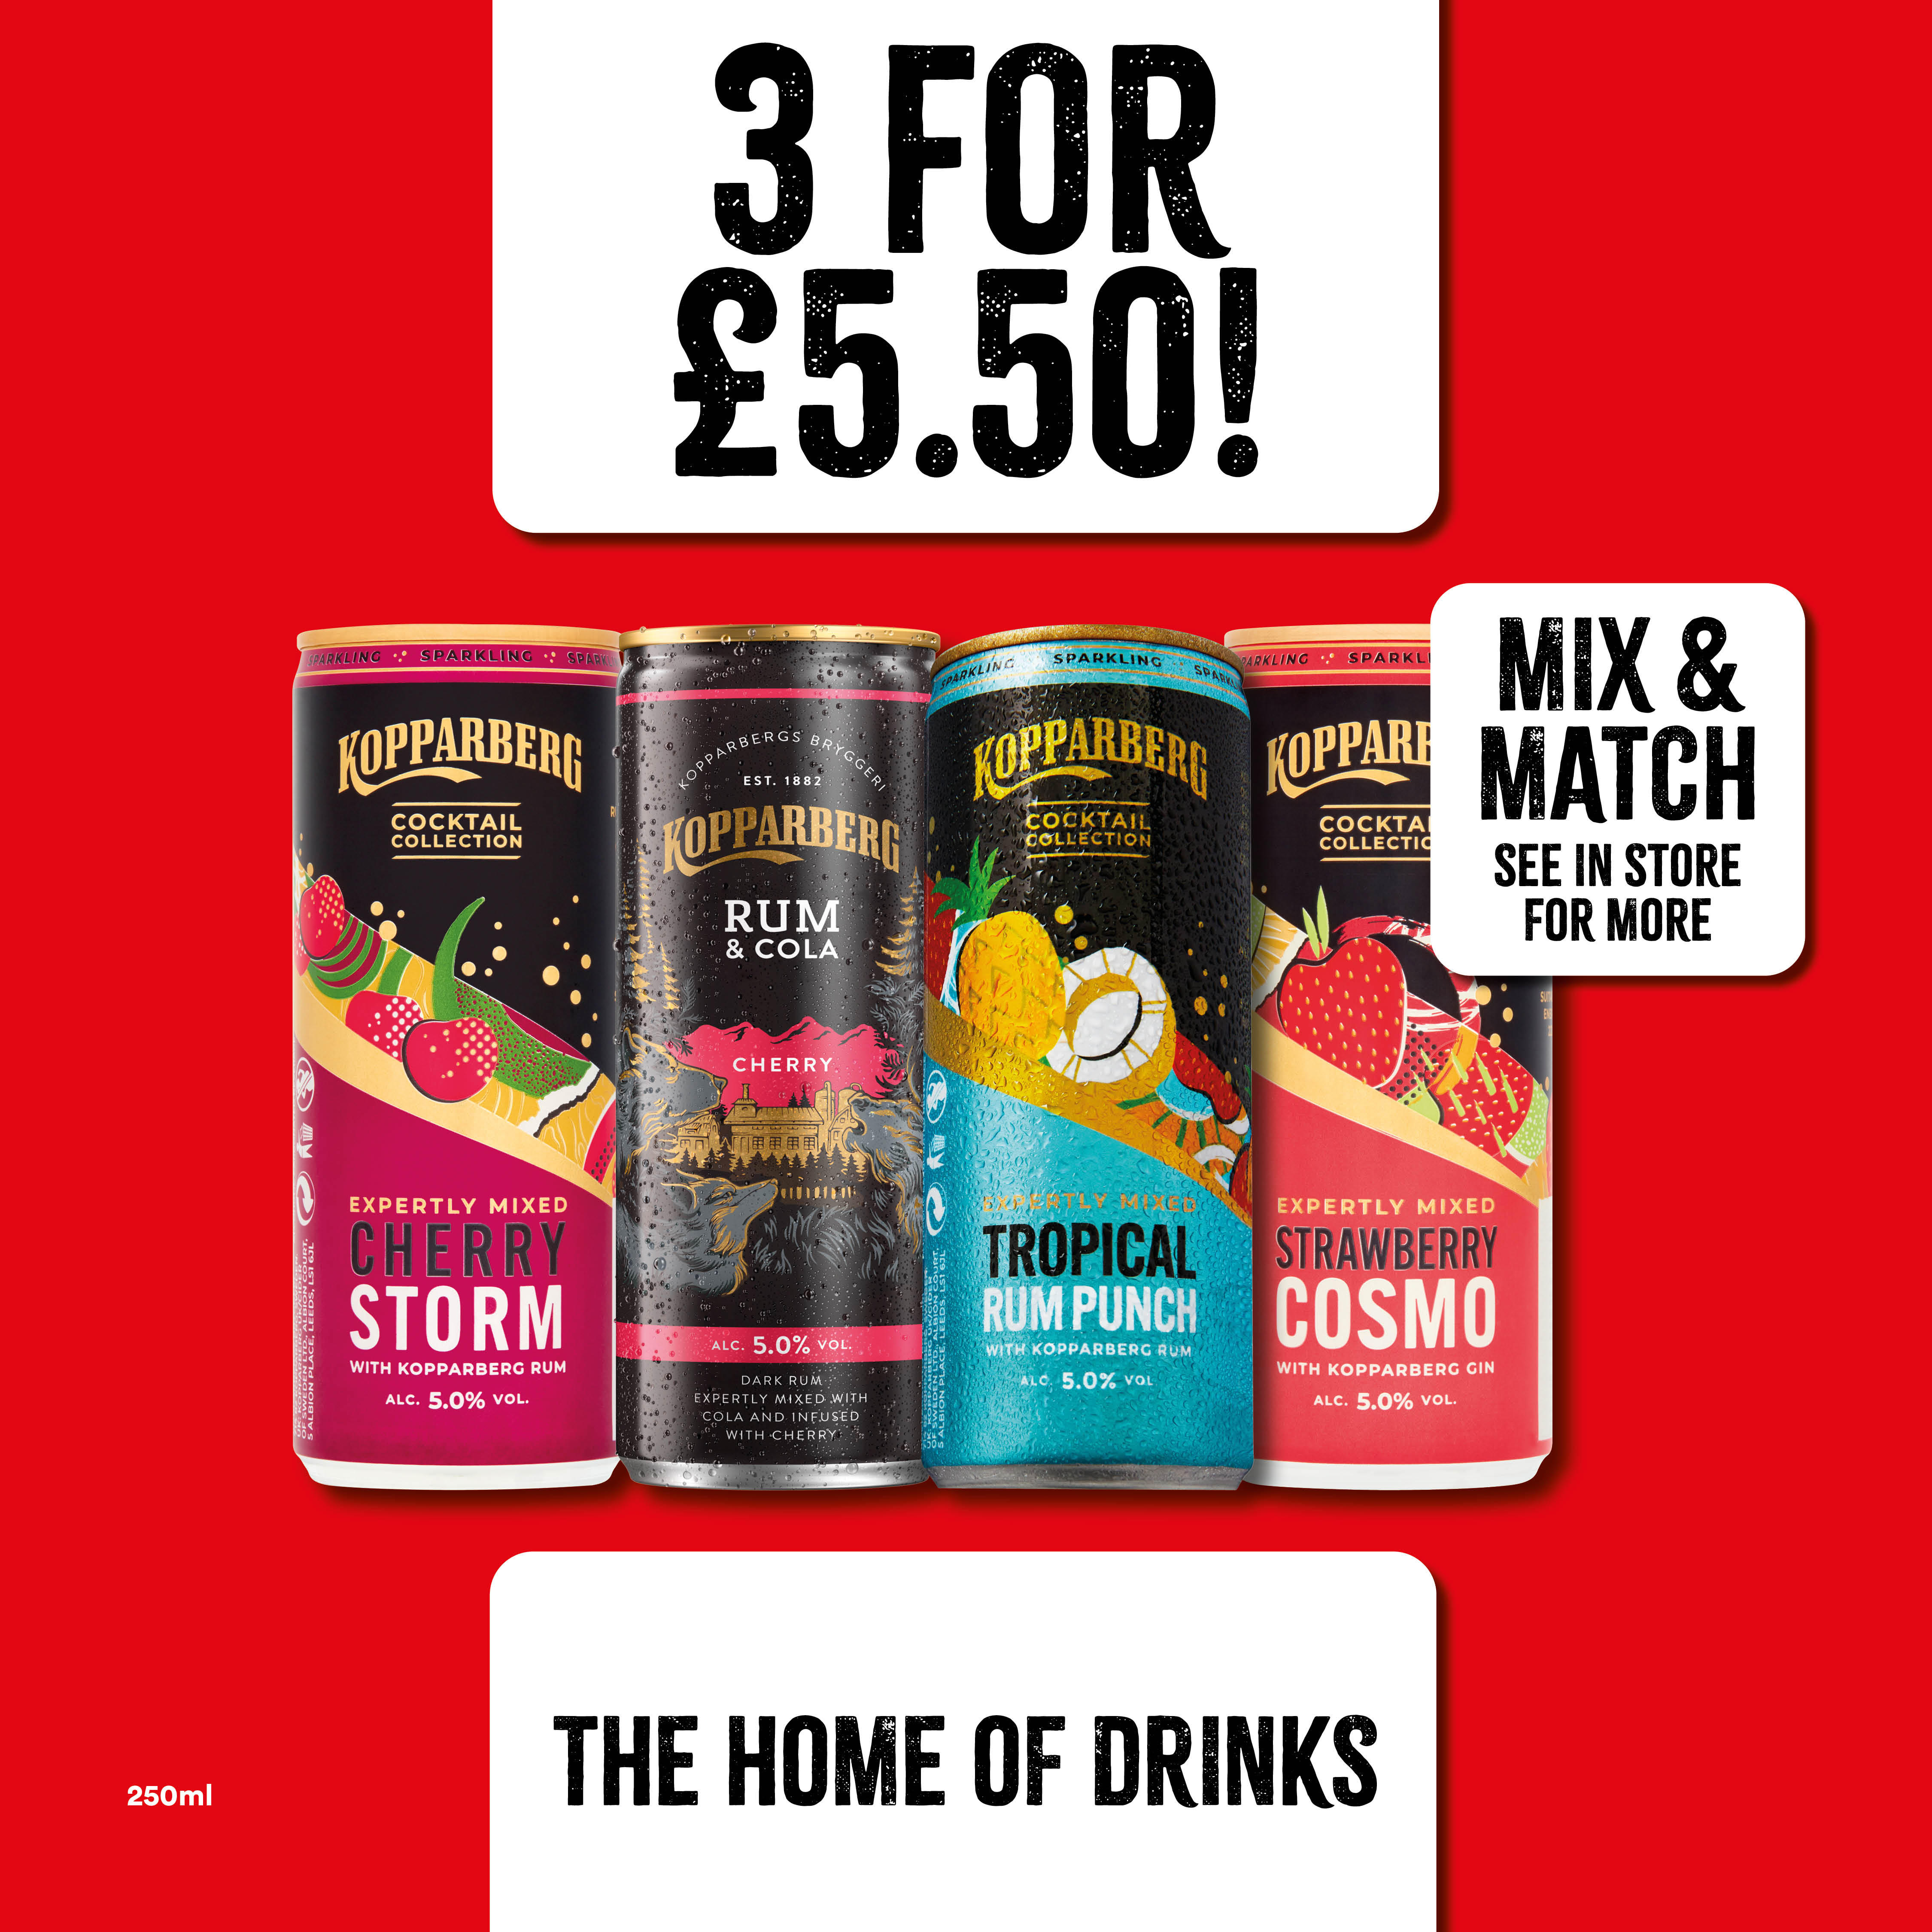 3 for £5.50 on ready to drink cans Bargain Booze Newport Pagnell 01908 612653